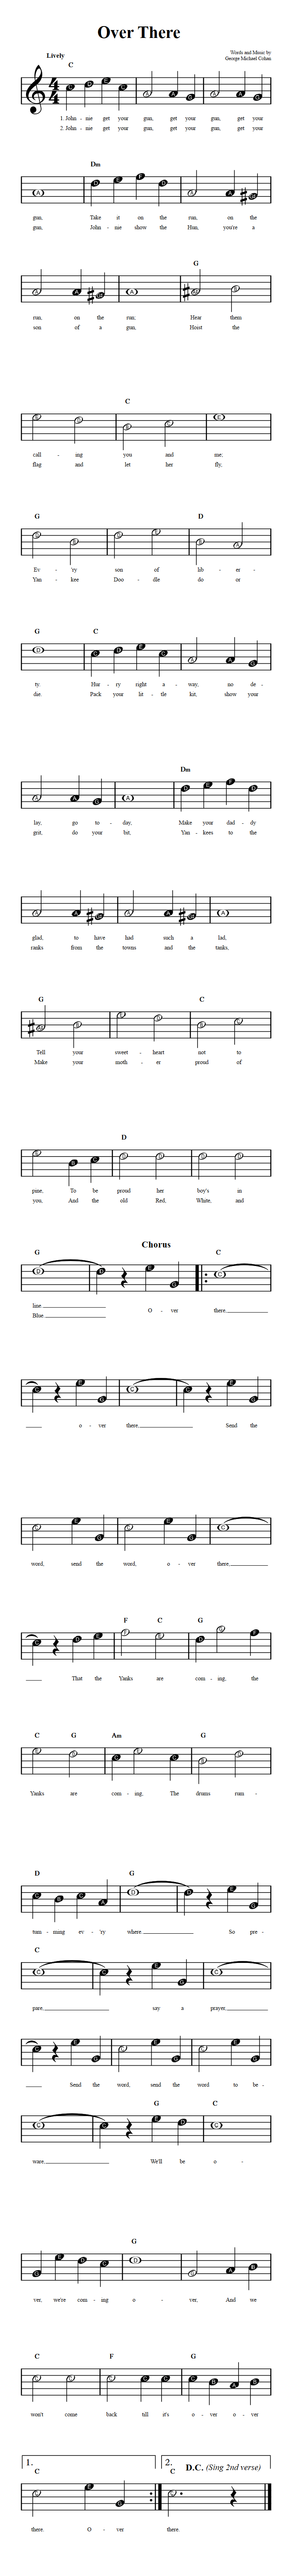 Over There  Beginner Sheet Music